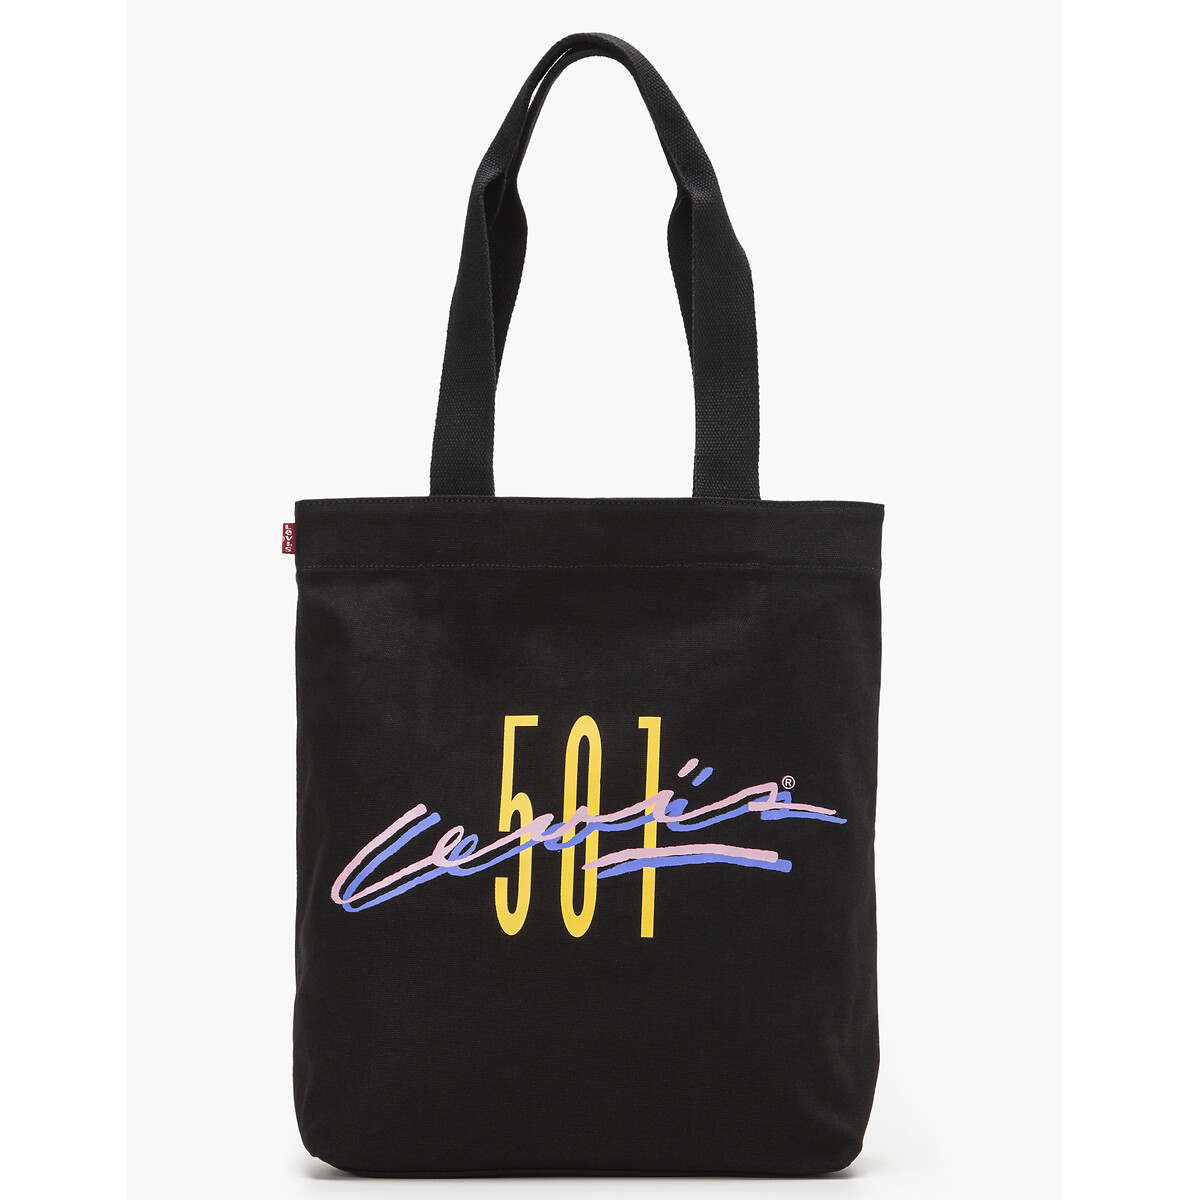 Image of 501 Icon Tote Bag in Cotton